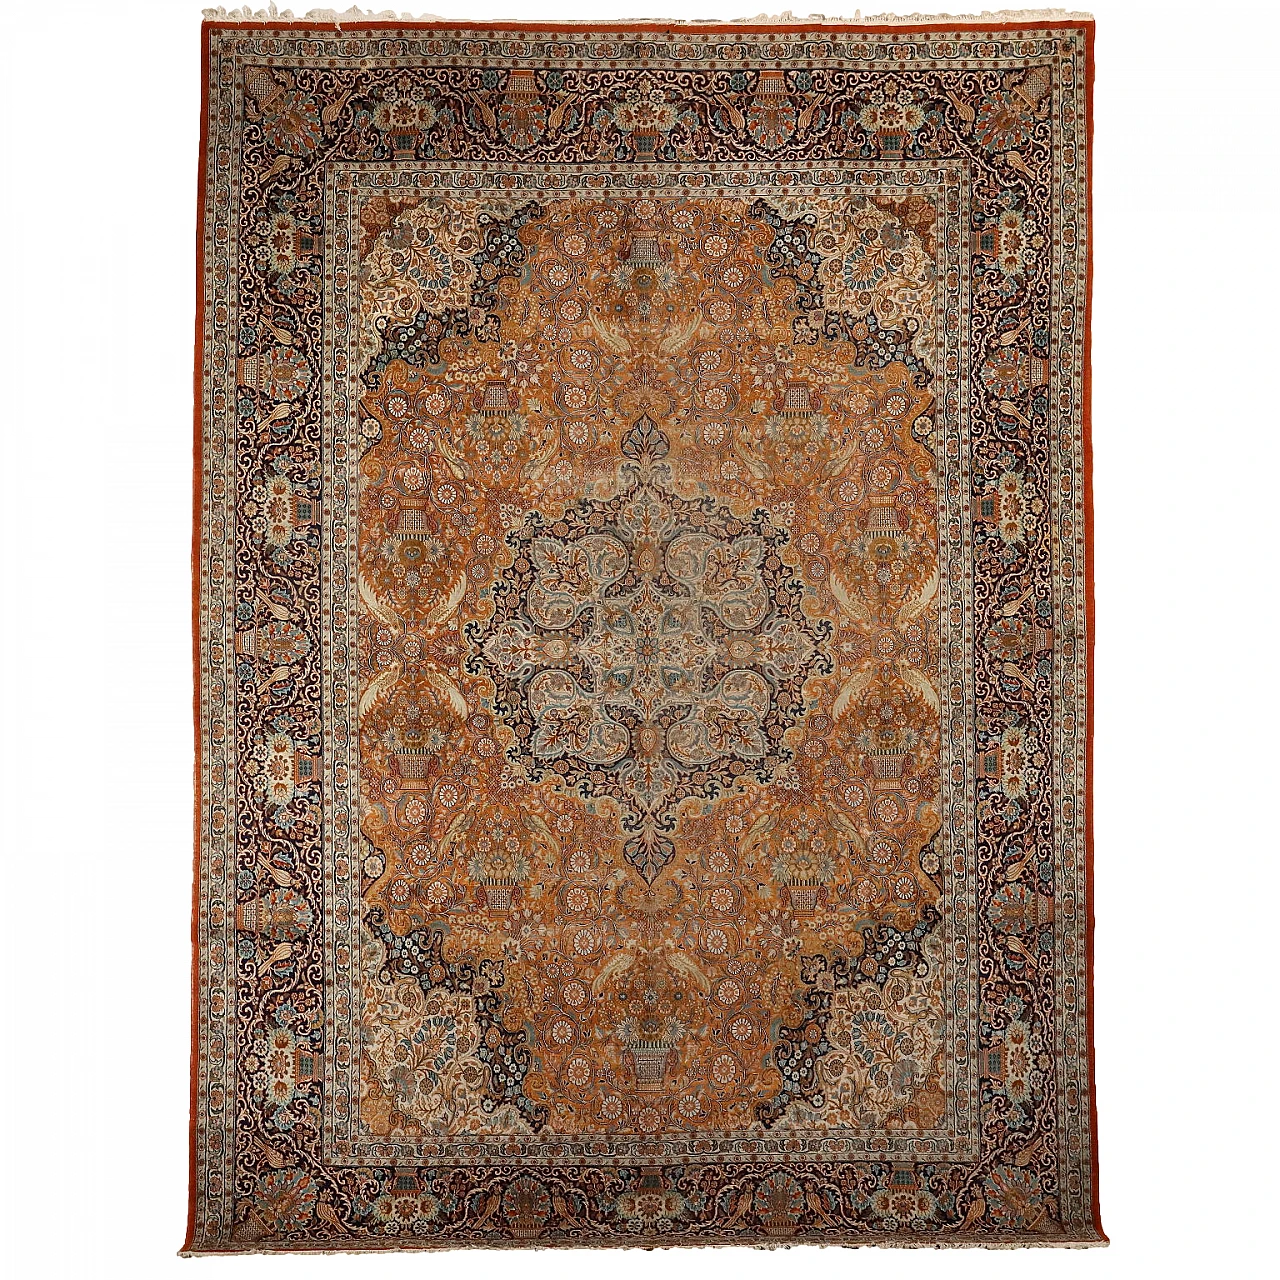 Lahore cotton, wool and silk fine-knotted rug 1